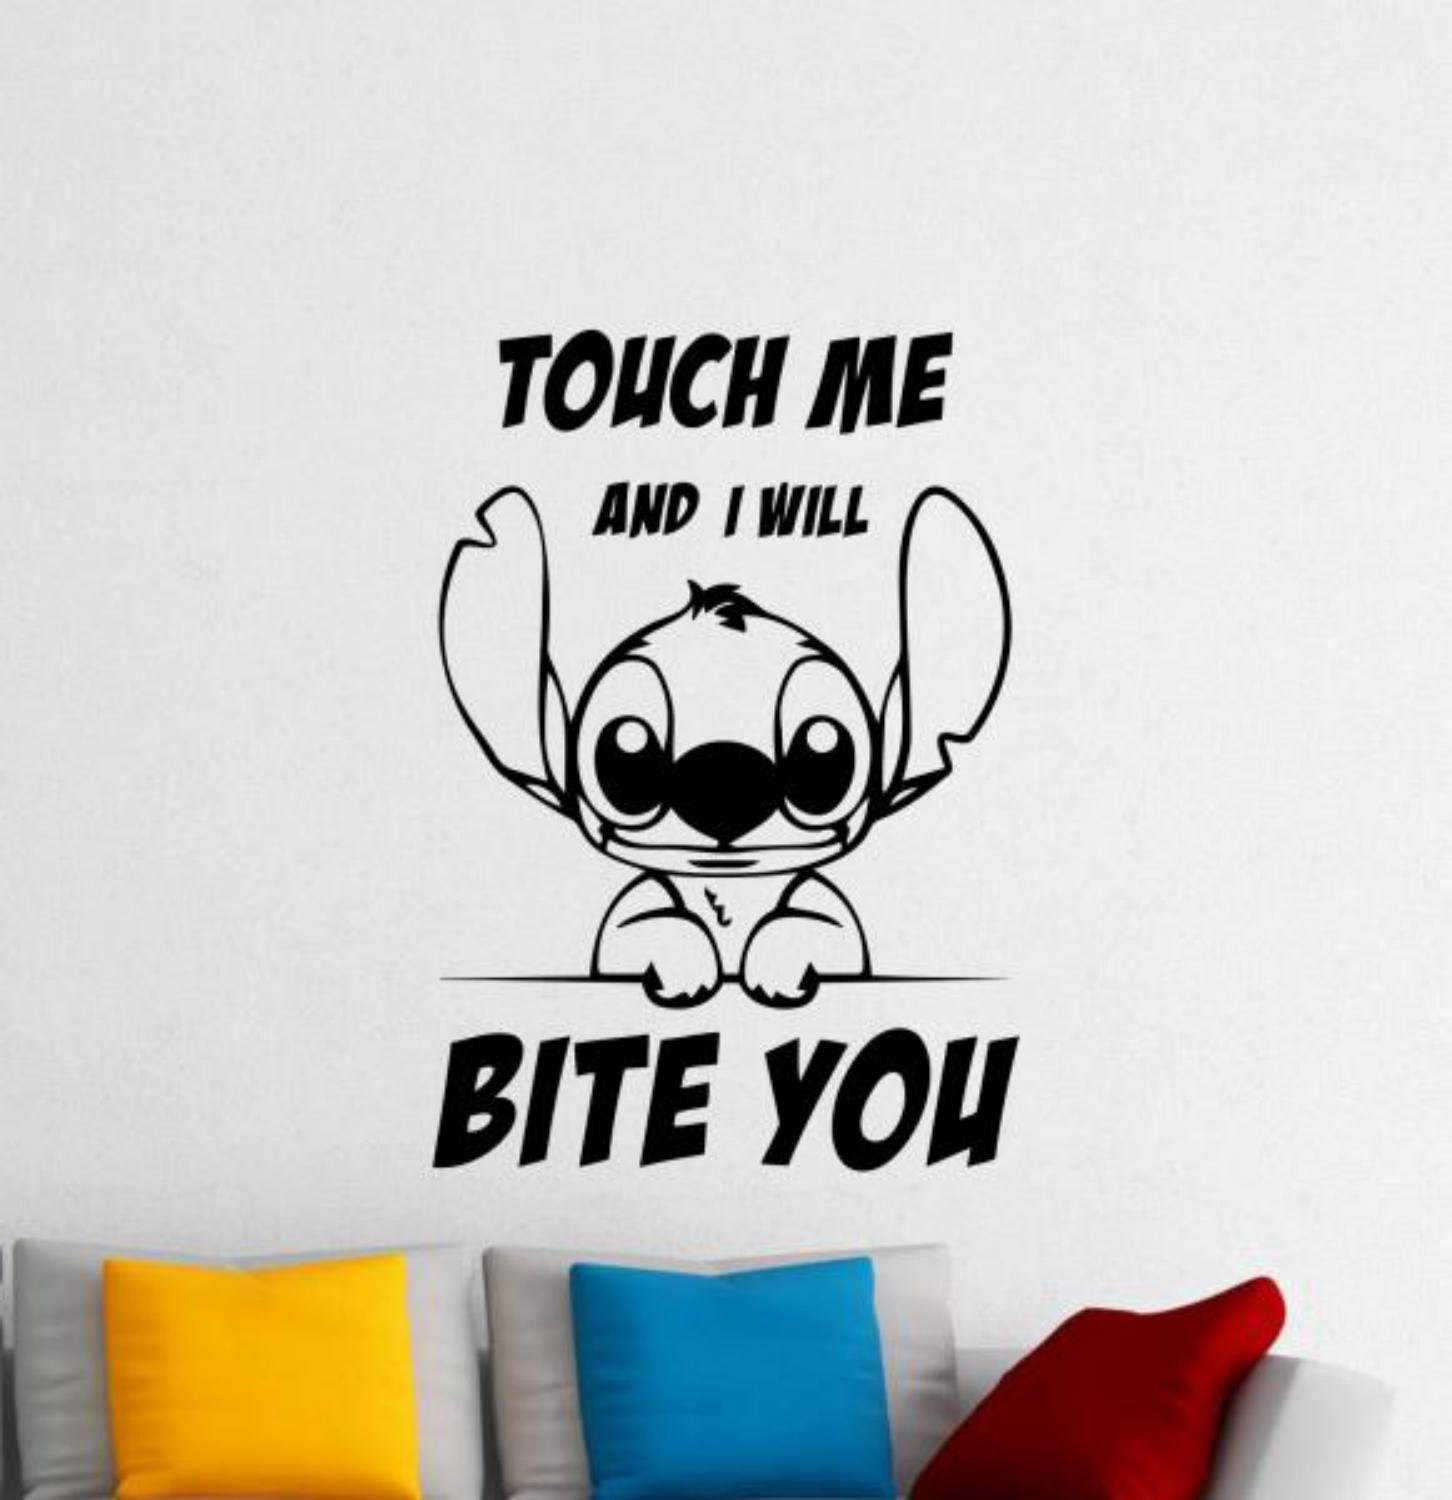 STITCH Blue Quote This is My Family Lilo and Stitch Disney Watercolor  Illustrations Art Print Giclee Wall Decor Art Home Decor Wall Hanging 